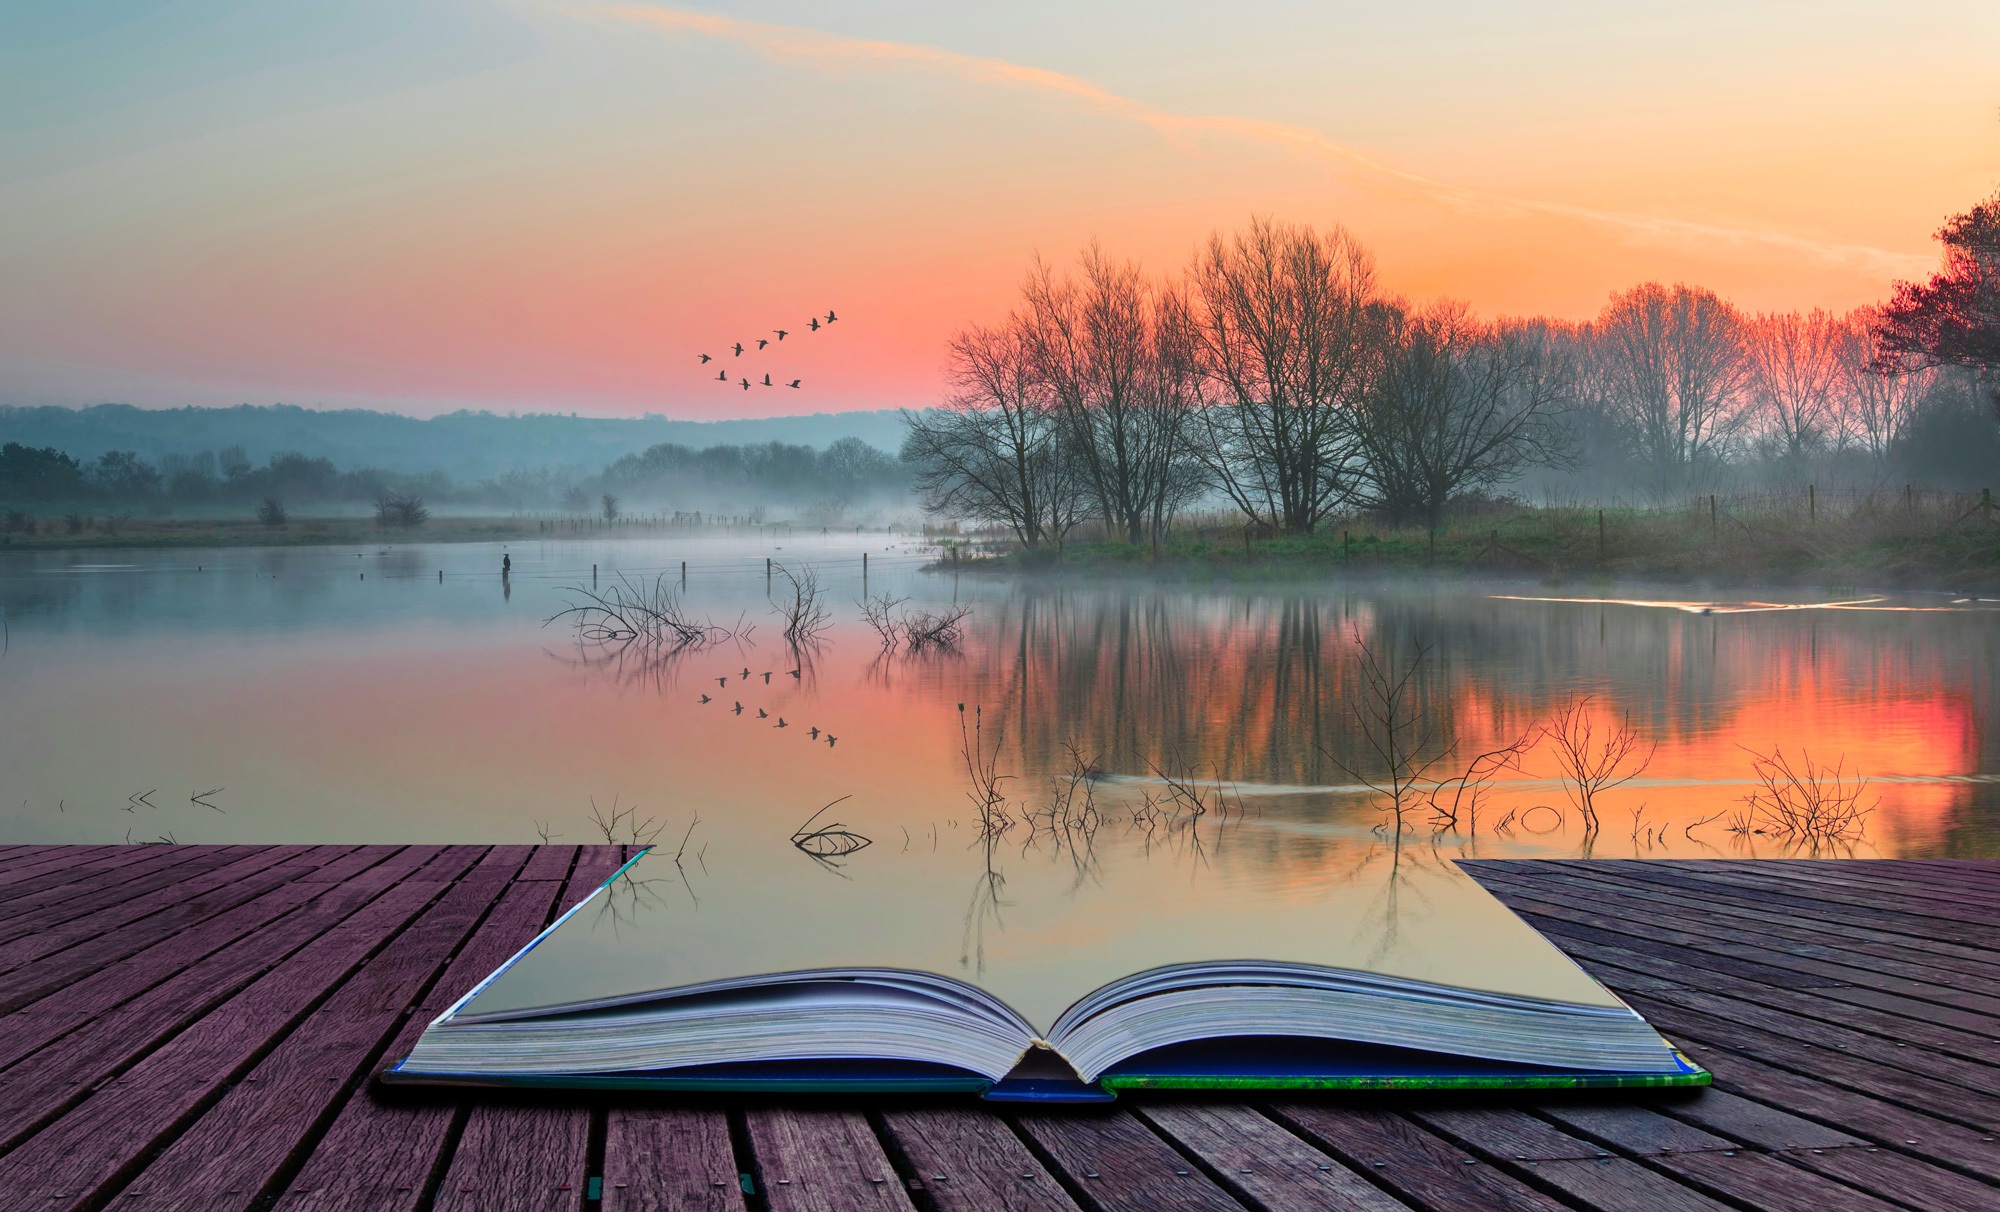 an open book on a wooden deck merges seamlessly with the lake in the background and a sunset sky